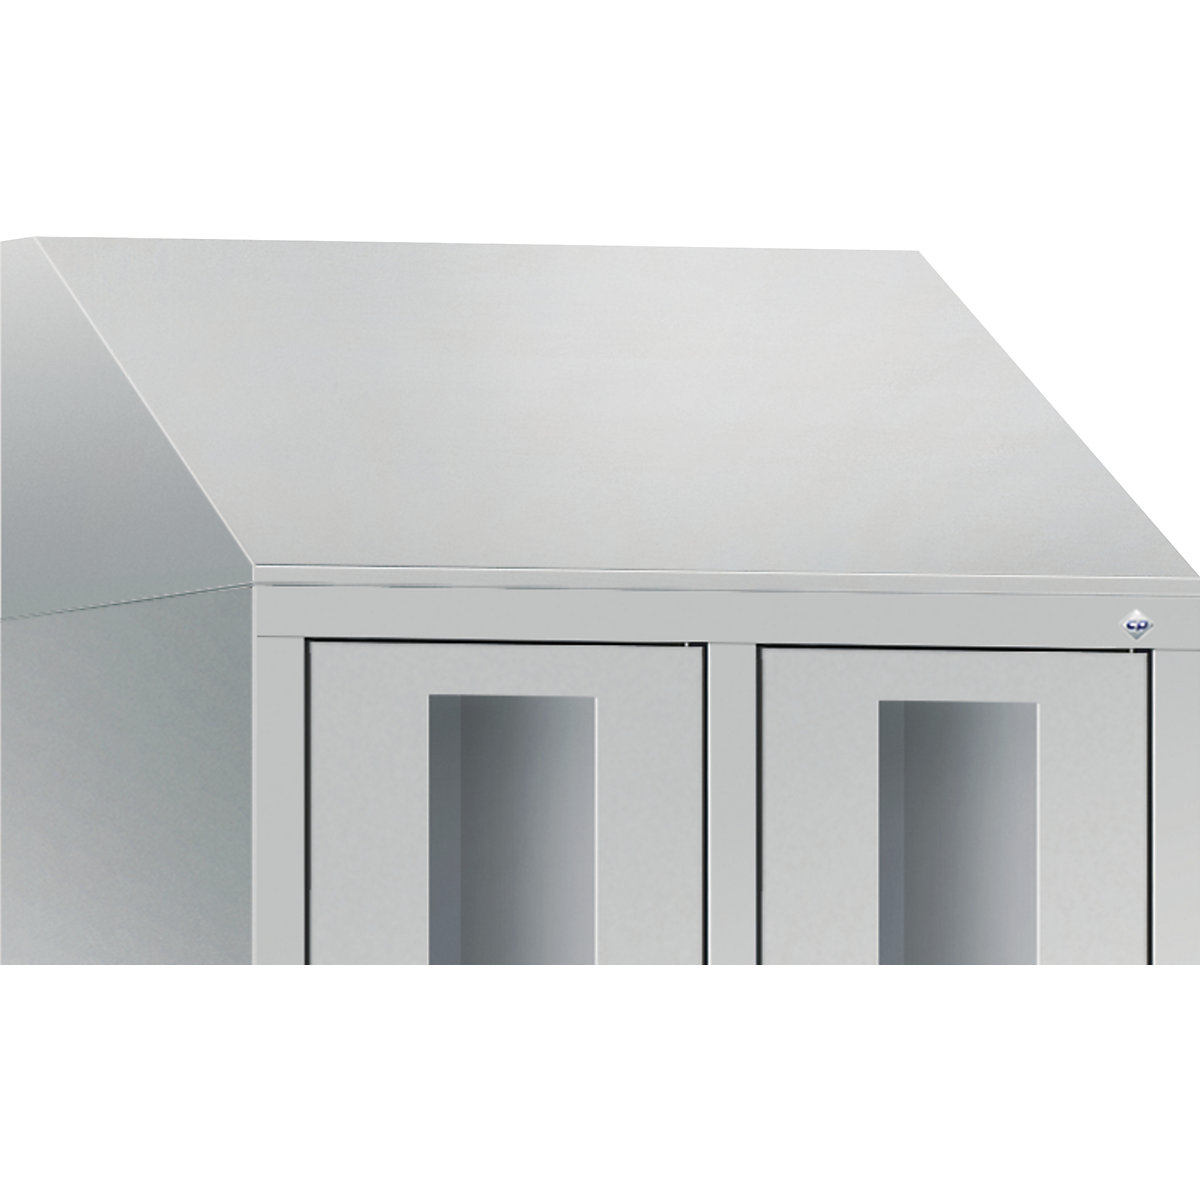 Sloping roof attachment – C+P